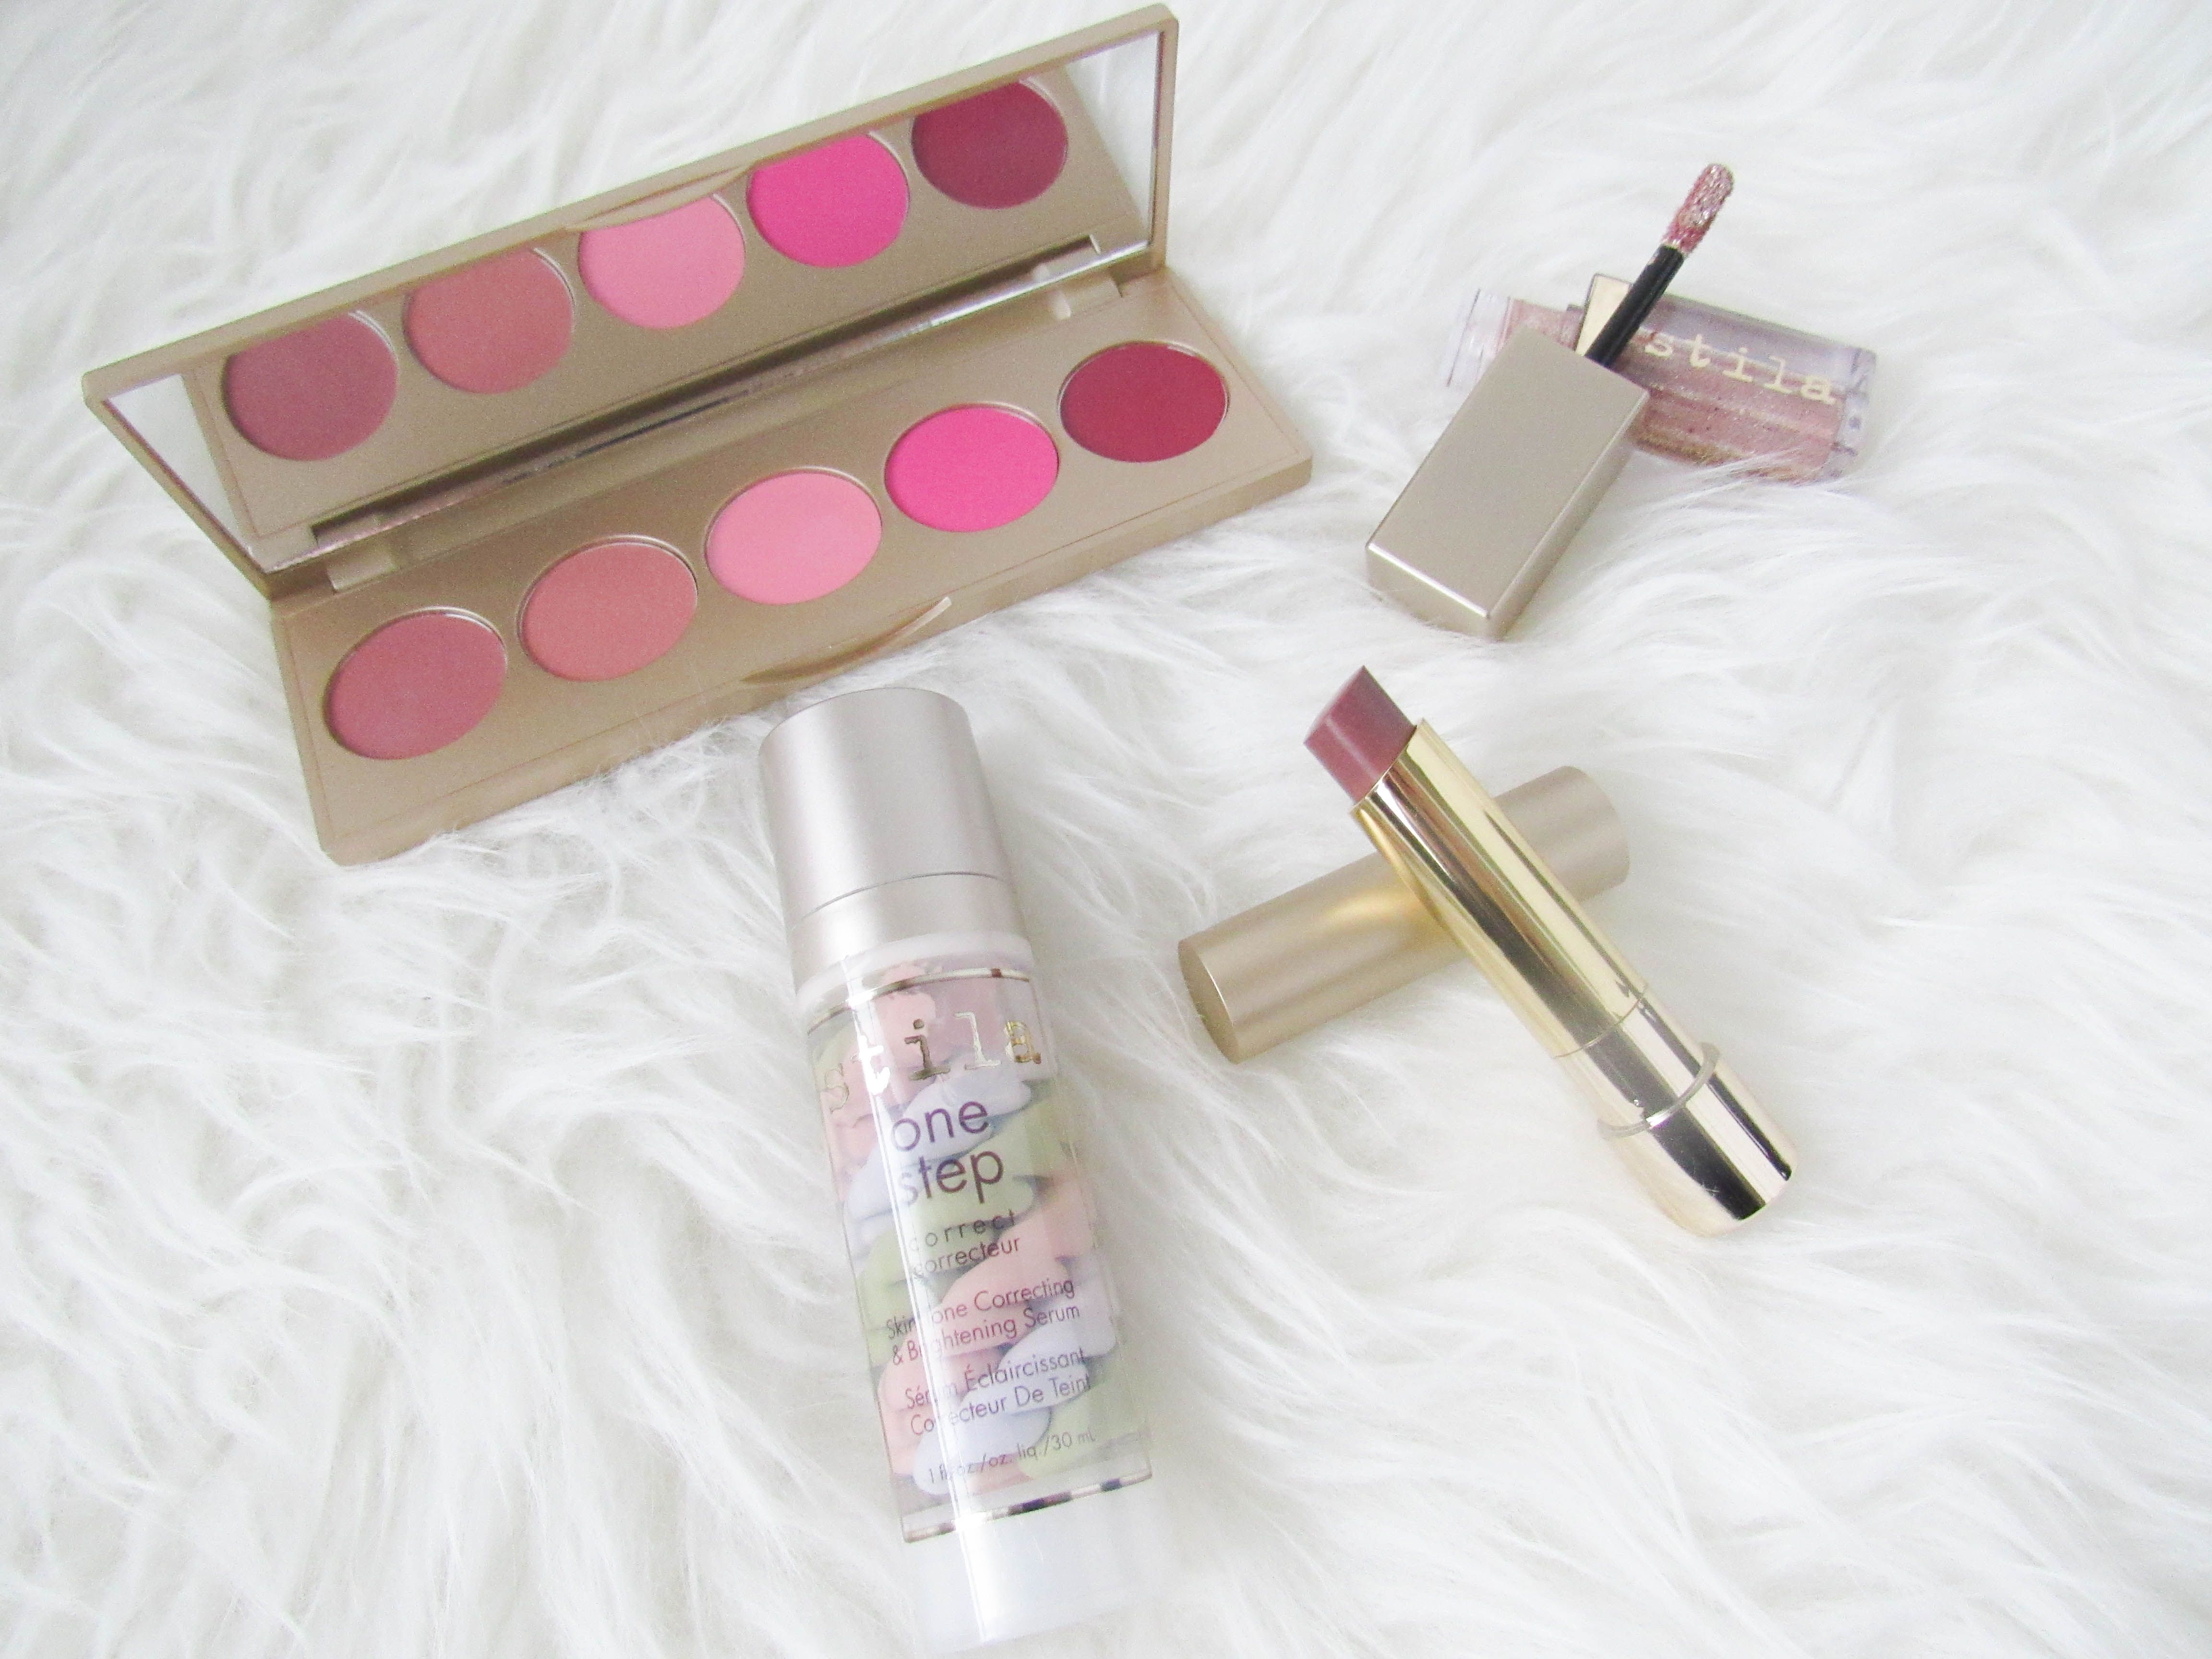 Stila Makeup Review on Livin Life with Style 